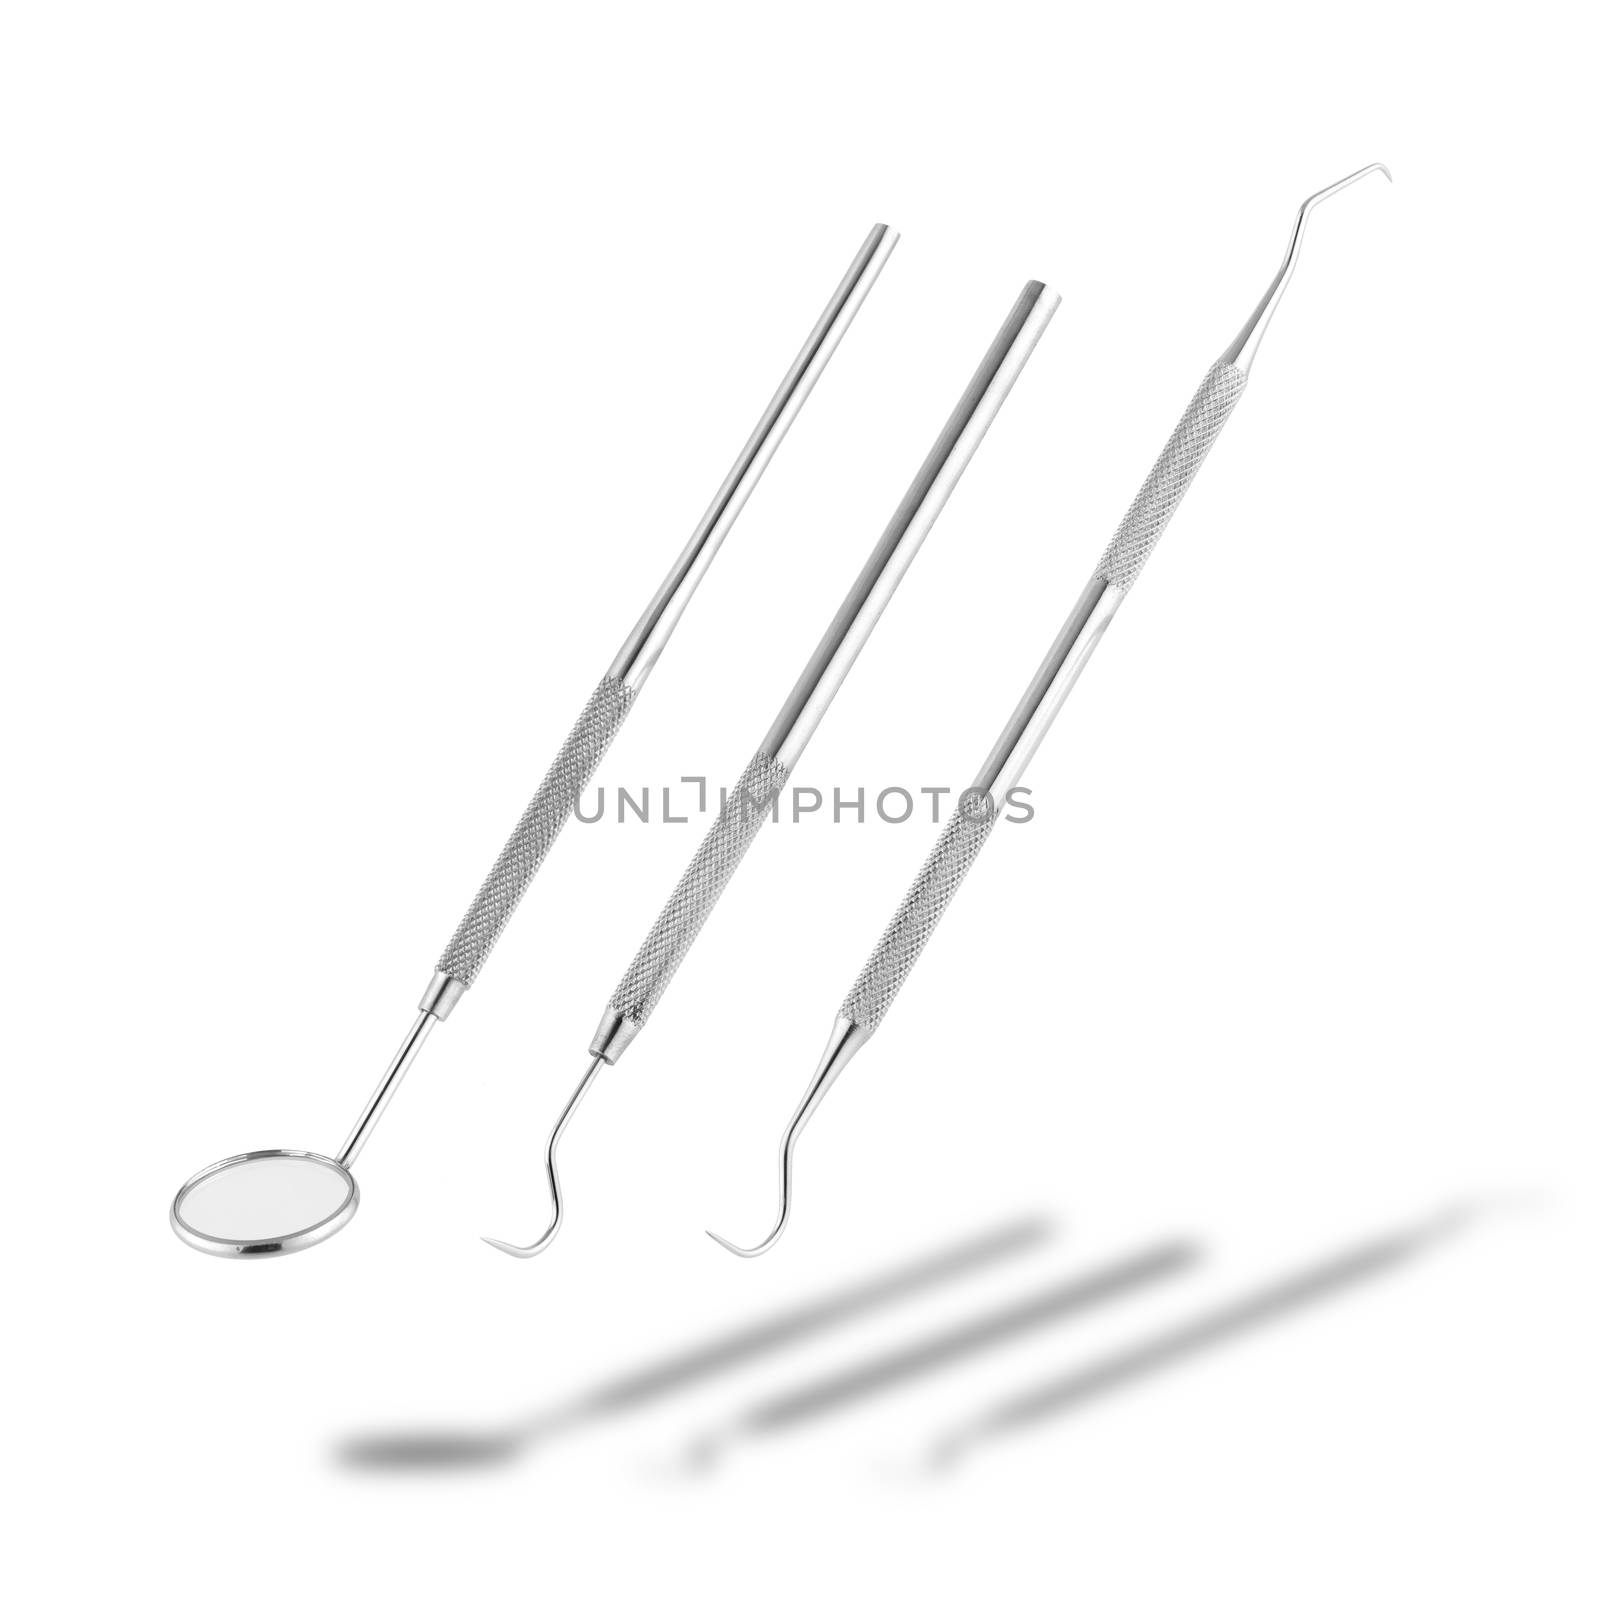 A set of dental tools on white background with clipping path